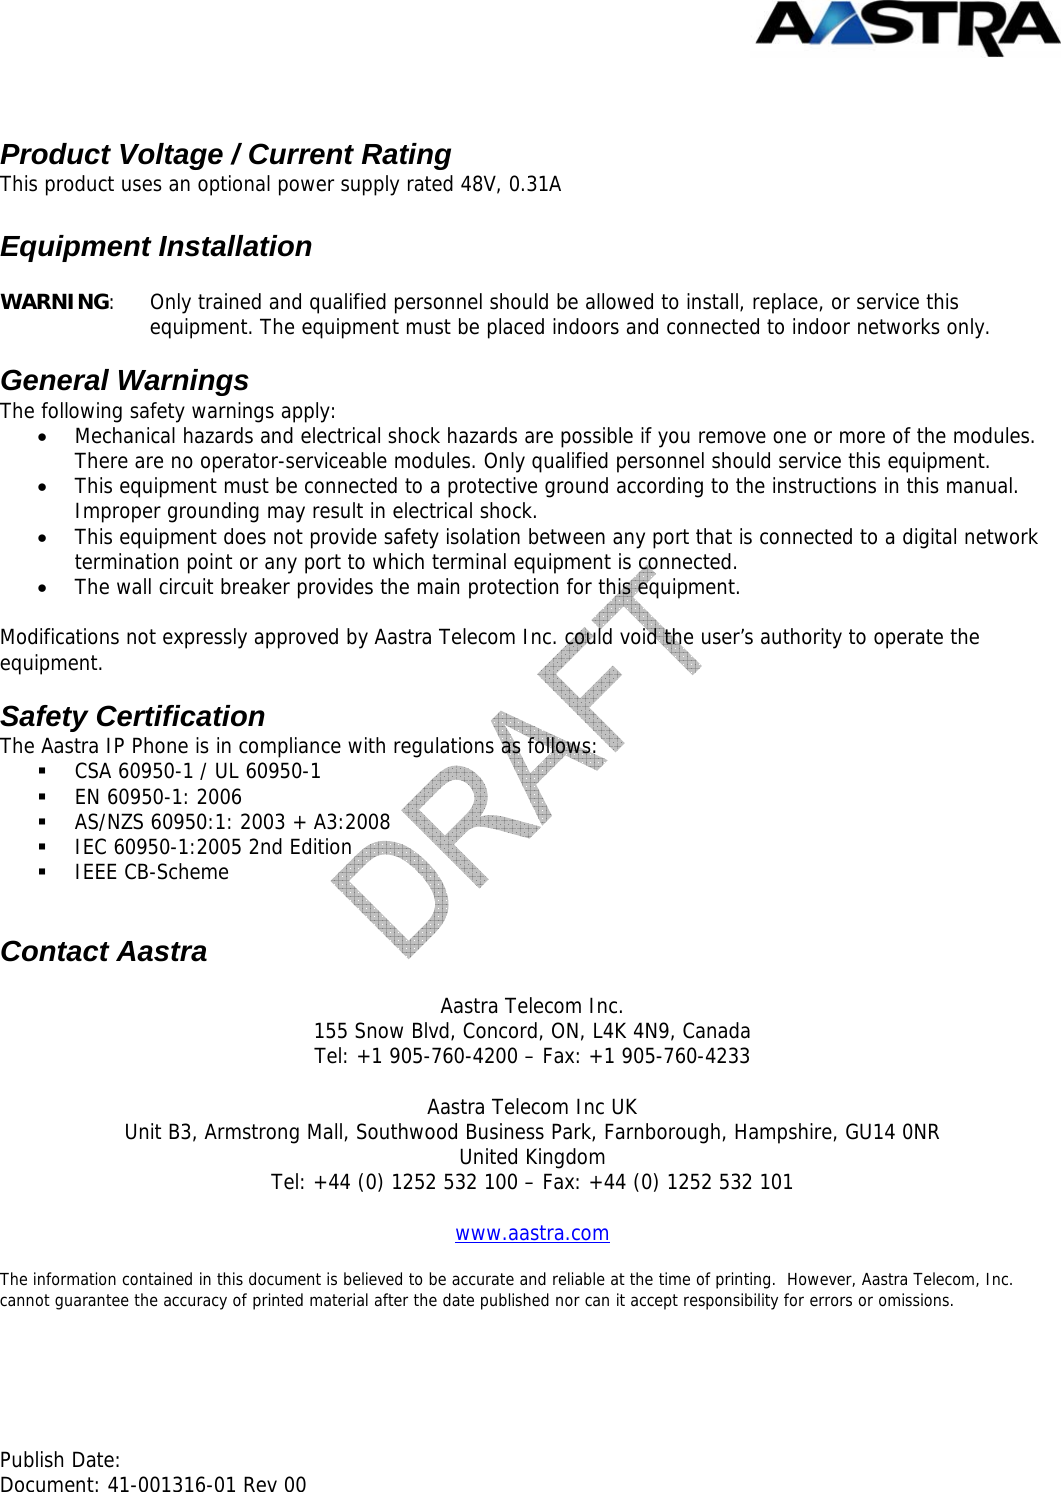  Publish Date:  Document: 41-001316-01 Rev 00   Product Voltage / Current Rating This product uses an optional power supply rated 48V, 0.31A  Equipment Installation  WARNING:  Only trained and qualified personnel should be allowed to install, replace, or service this equipment. The equipment must be placed indoors and connected to indoor networks only.  General Warnings The following safety warnings apply: • Mechanical hazards and electrical shock hazards are possible if you remove one or more of the modules. There are no operator-serviceable modules. Only qualified personnel should service this equipment. • This equipment must be connected to a protective ground according to the instructions in this manual. Improper grounding may result in electrical shock. • This equipment does not provide safety isolation between any port that is connected to a digital network termination point or any port to which terminal equipment is connected. • The wall circuit breaker provides the main protection for this equipment.  Modifications not expressly approved by Aastra Telecom Inc. could void the user’s authority to operate the equipment.  Safety Certification The Aastra IP Phone is in compliance with regulations as follows:   CSA 60950-1 / UL 60950-1  EN 60950-1: 2006  AS/NZS 60950:1: 2003 + A3:2008  IEC 60950-1:2005 2nd Edition  IEEE CB-Scheme   Contact Aastra  Aastra Telecom Inc. 155 Snow Blvd, Concord, ON, L4K 4N9, Canada Tel: +1 905-760-4200 – Fax: +1 905-760-4233  Aastra Telecom Inc UK Unit B3, Armstrong Mall, Southwood Business Park, Farnborough, Hampshire, GU14 0NR United Kingdom Tel: +44 (0) 1252 532 100 – Fax: +44 (0) 1252 532 101  www.aastra.com  The information contained in this document is believed to be accurate and reliable at the time of printing.  However, Aastra Telecom, Inc. cannot guarantee the accuracy of printed material after the date published nor can it accept responsibility for errors or omissions. 